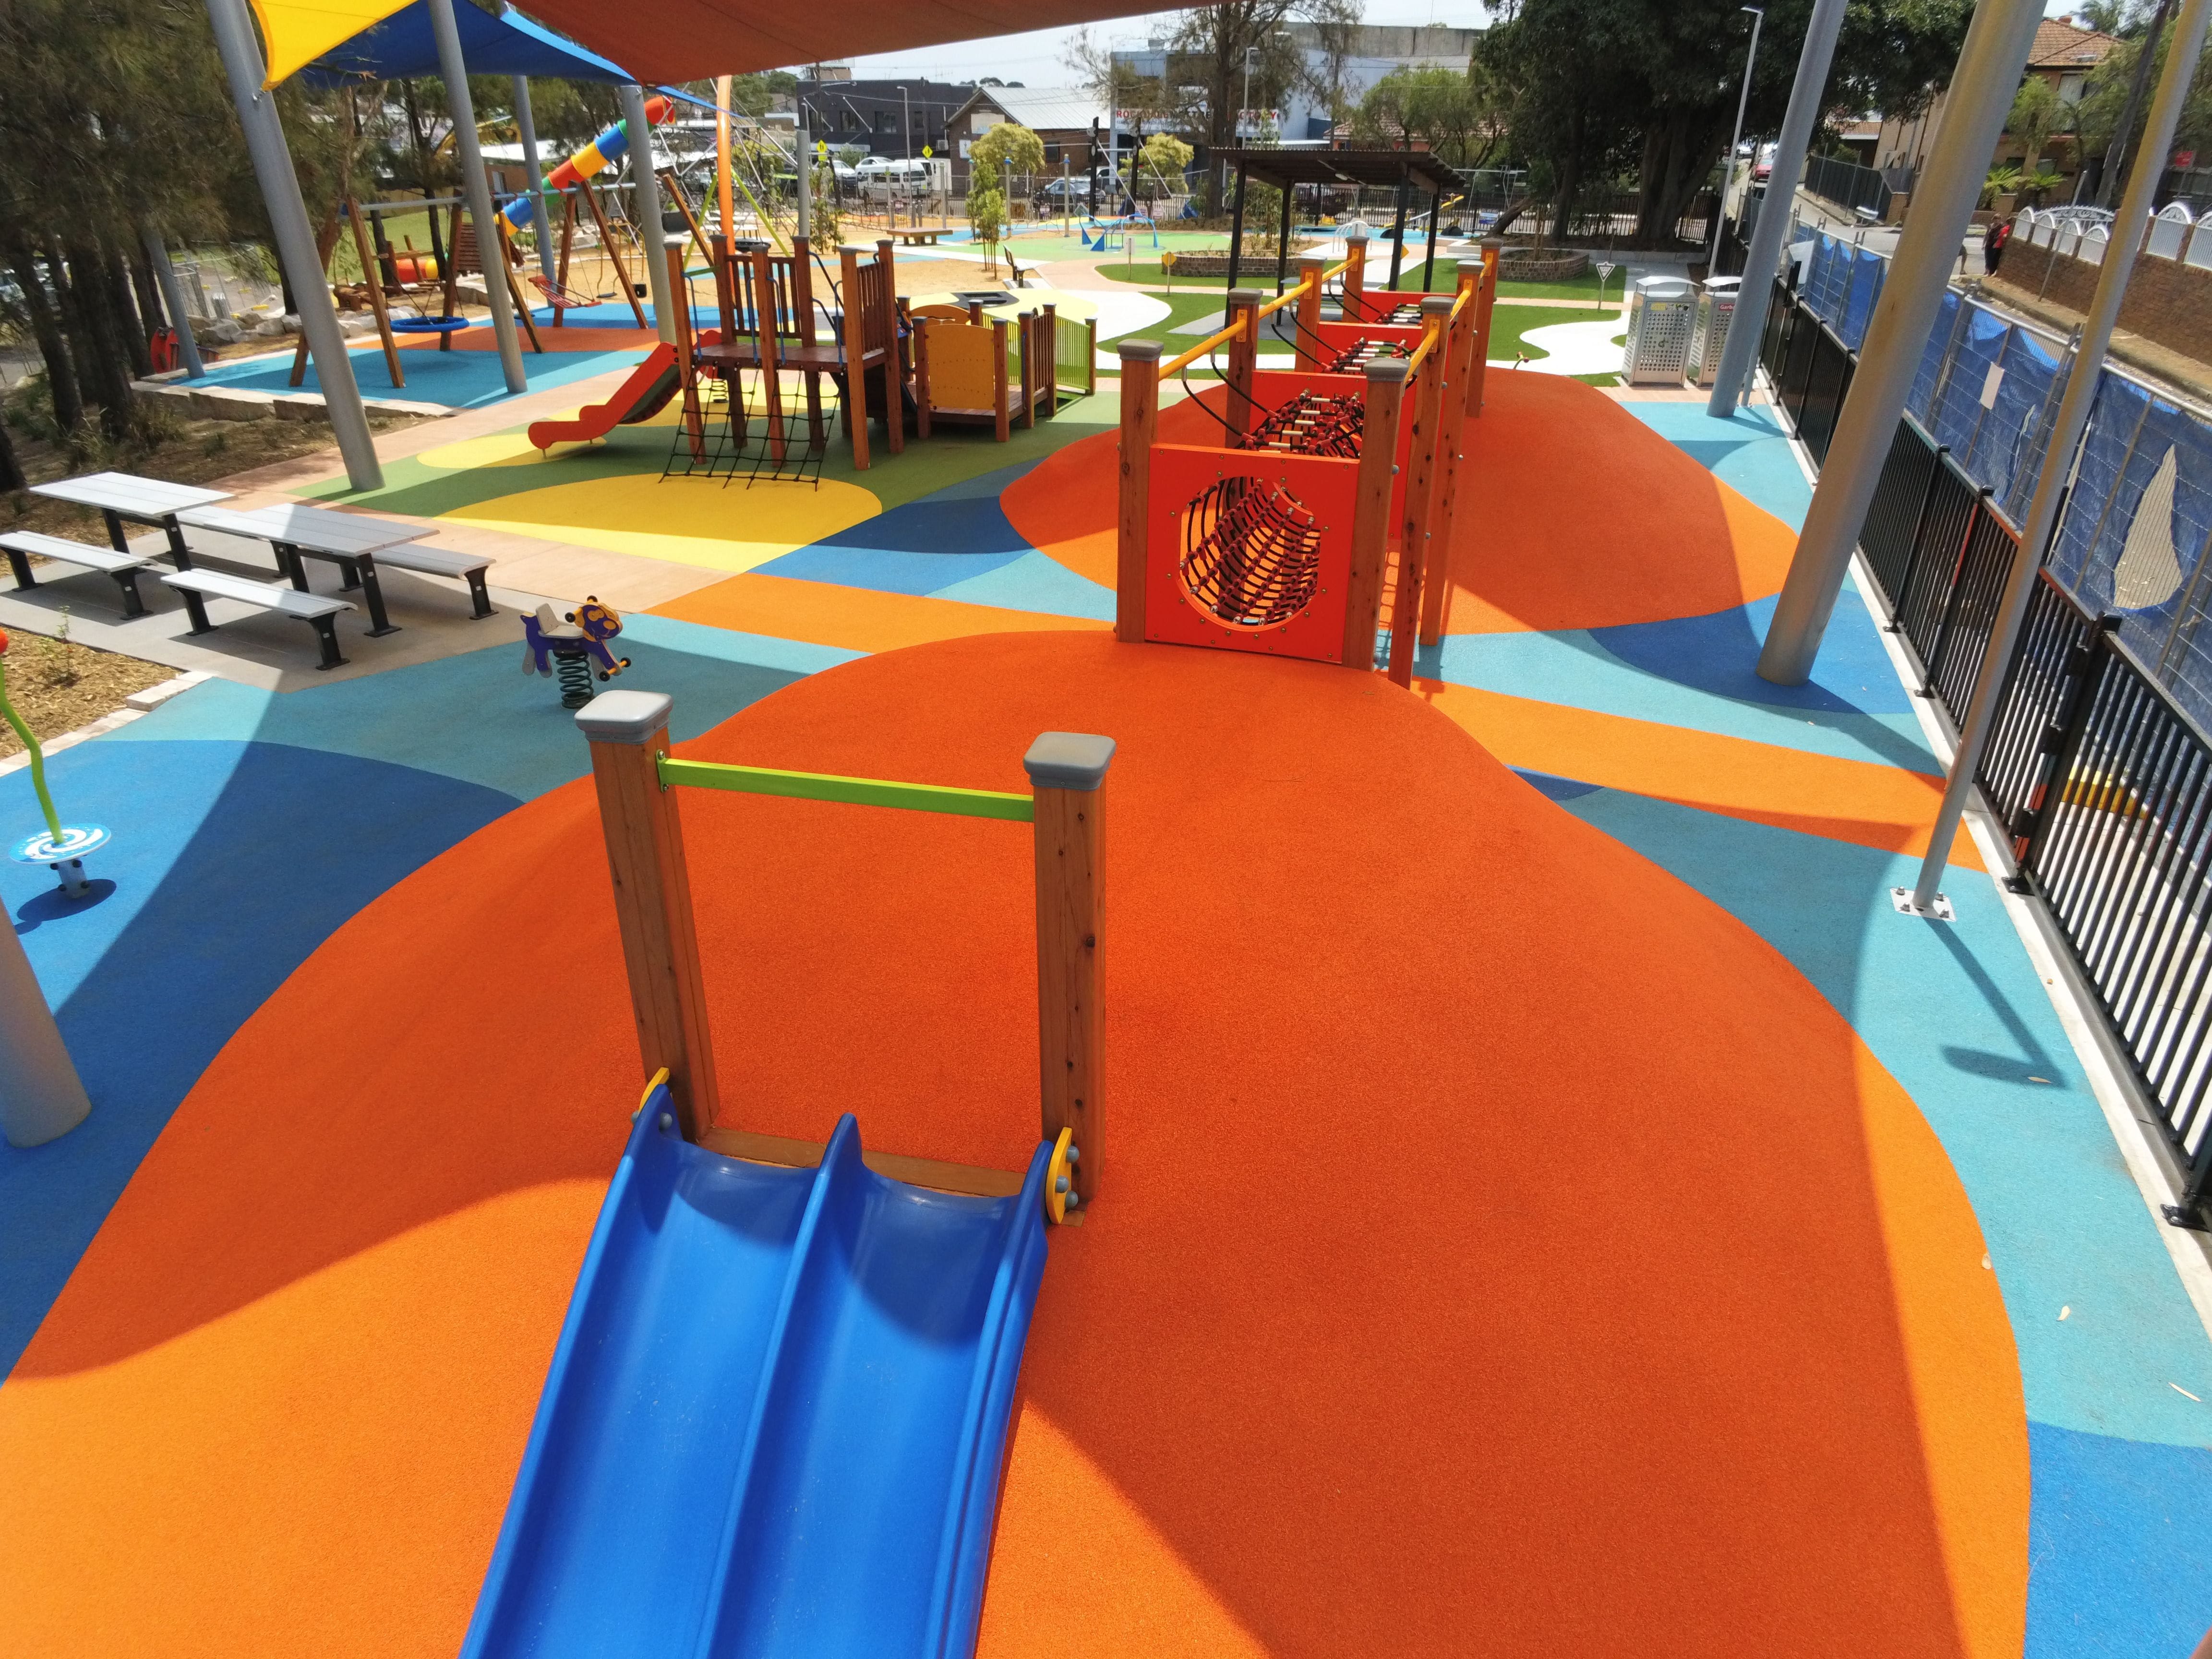 Australian Sports & Safety Surfaces - Inclusive Adventure Playground and Bike Training Circuit at Kempt Field Image -5df978d8930cb